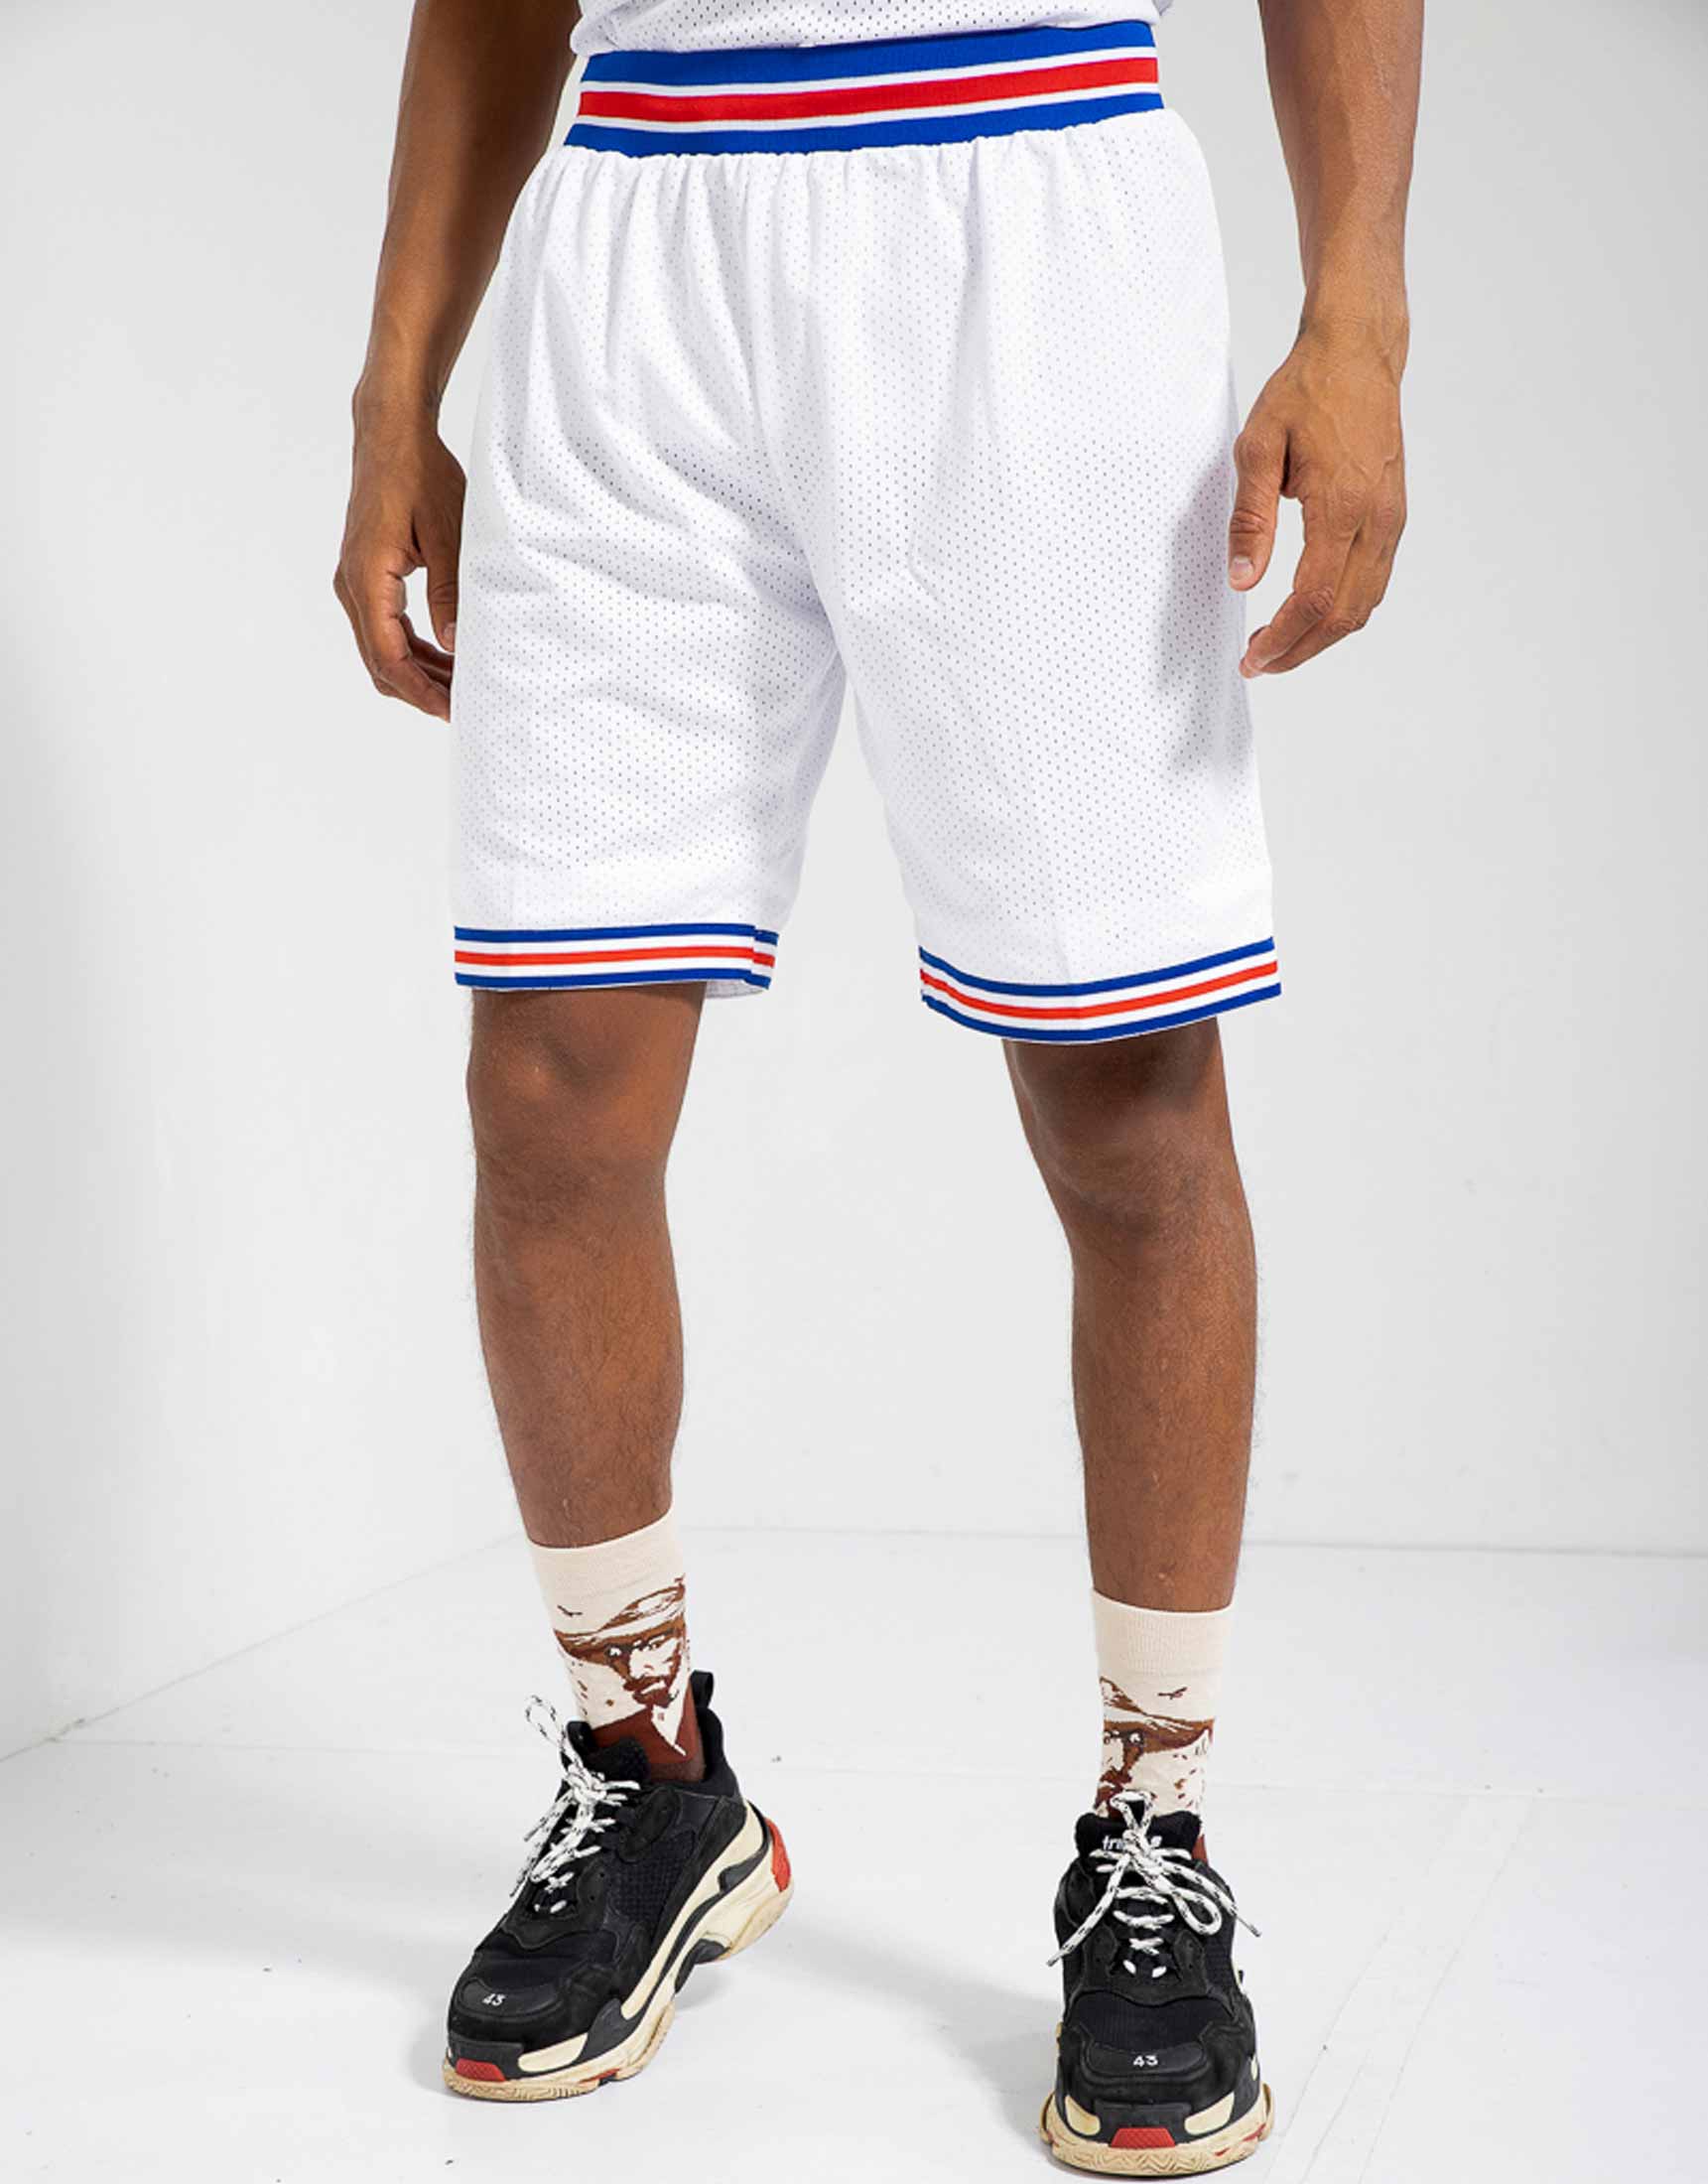 Space Jam Tune Squad Looney Tunes Men's Basketball Short Shop top fashion brands Shorts at Unlimited Classics